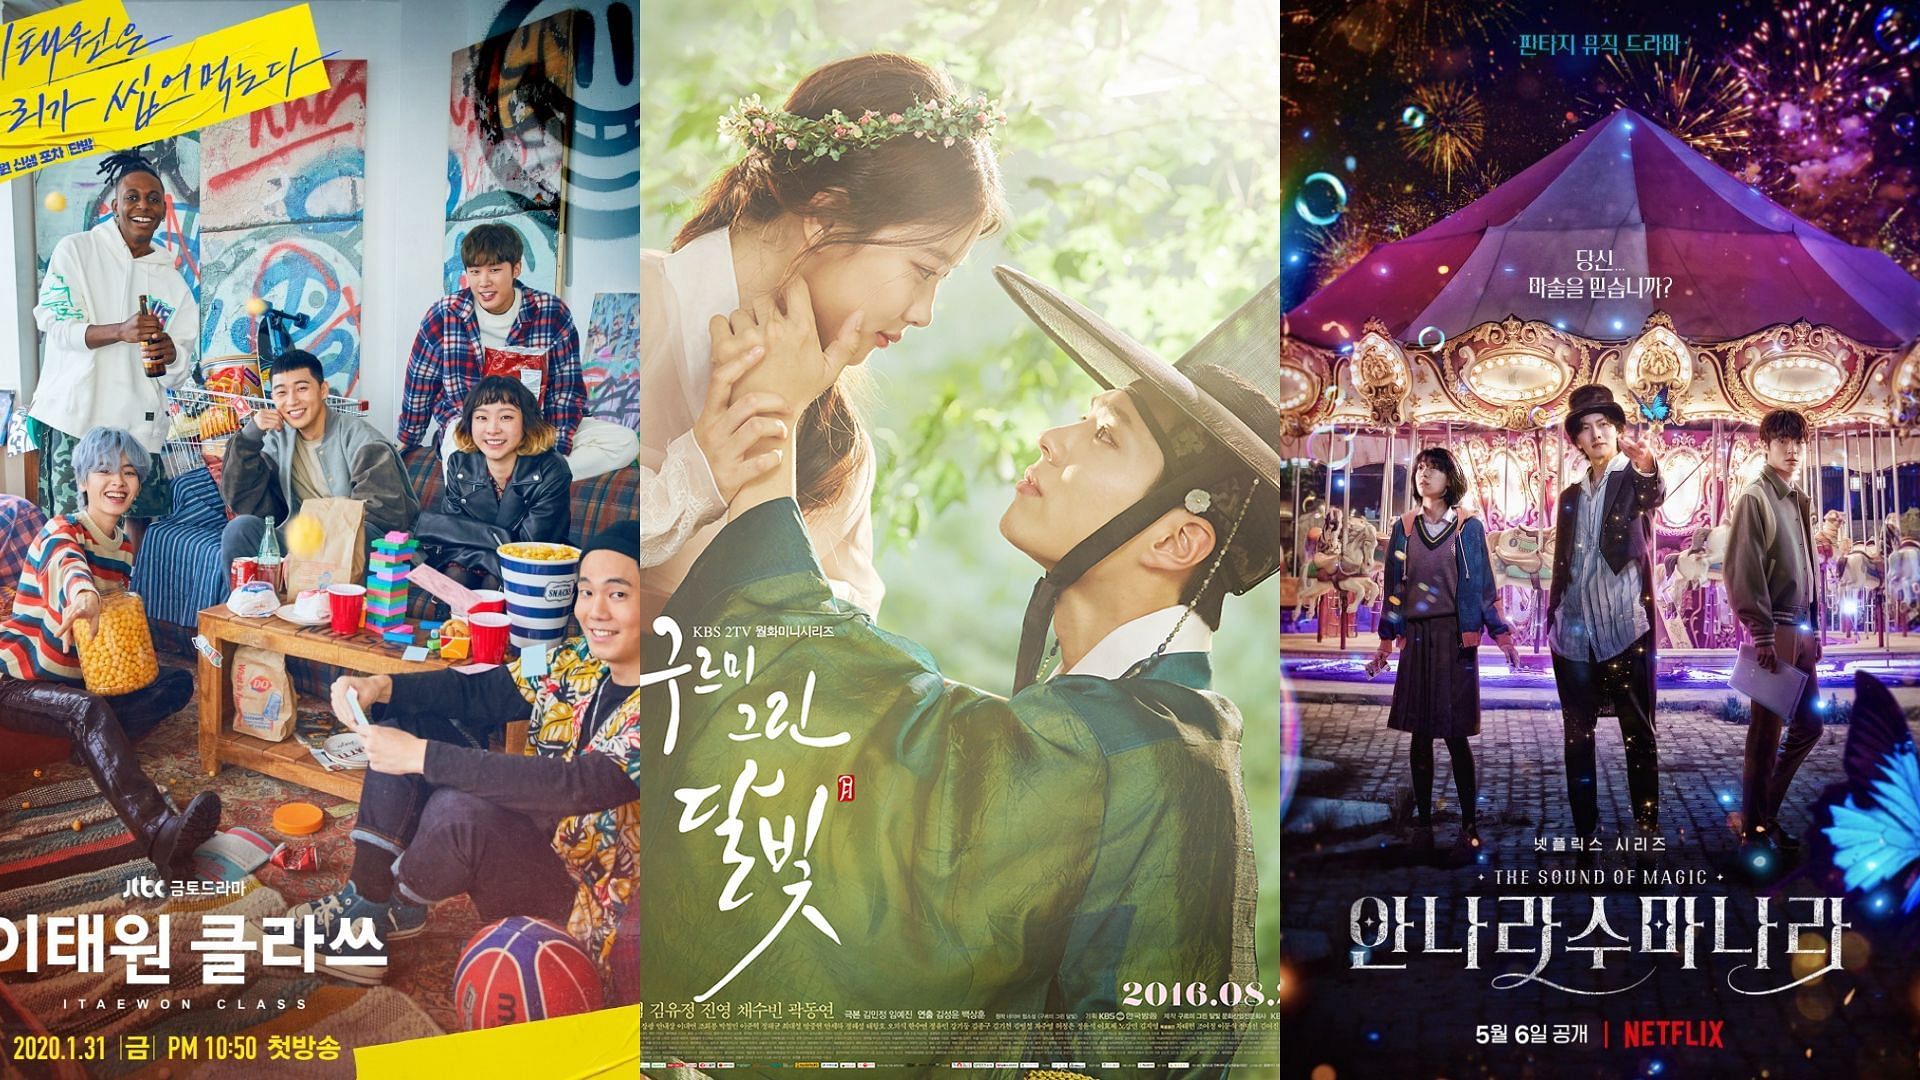 The posters for Itaewon Class, Love in the Moonlight and The Sound of Magic (Image via Asianwiki)